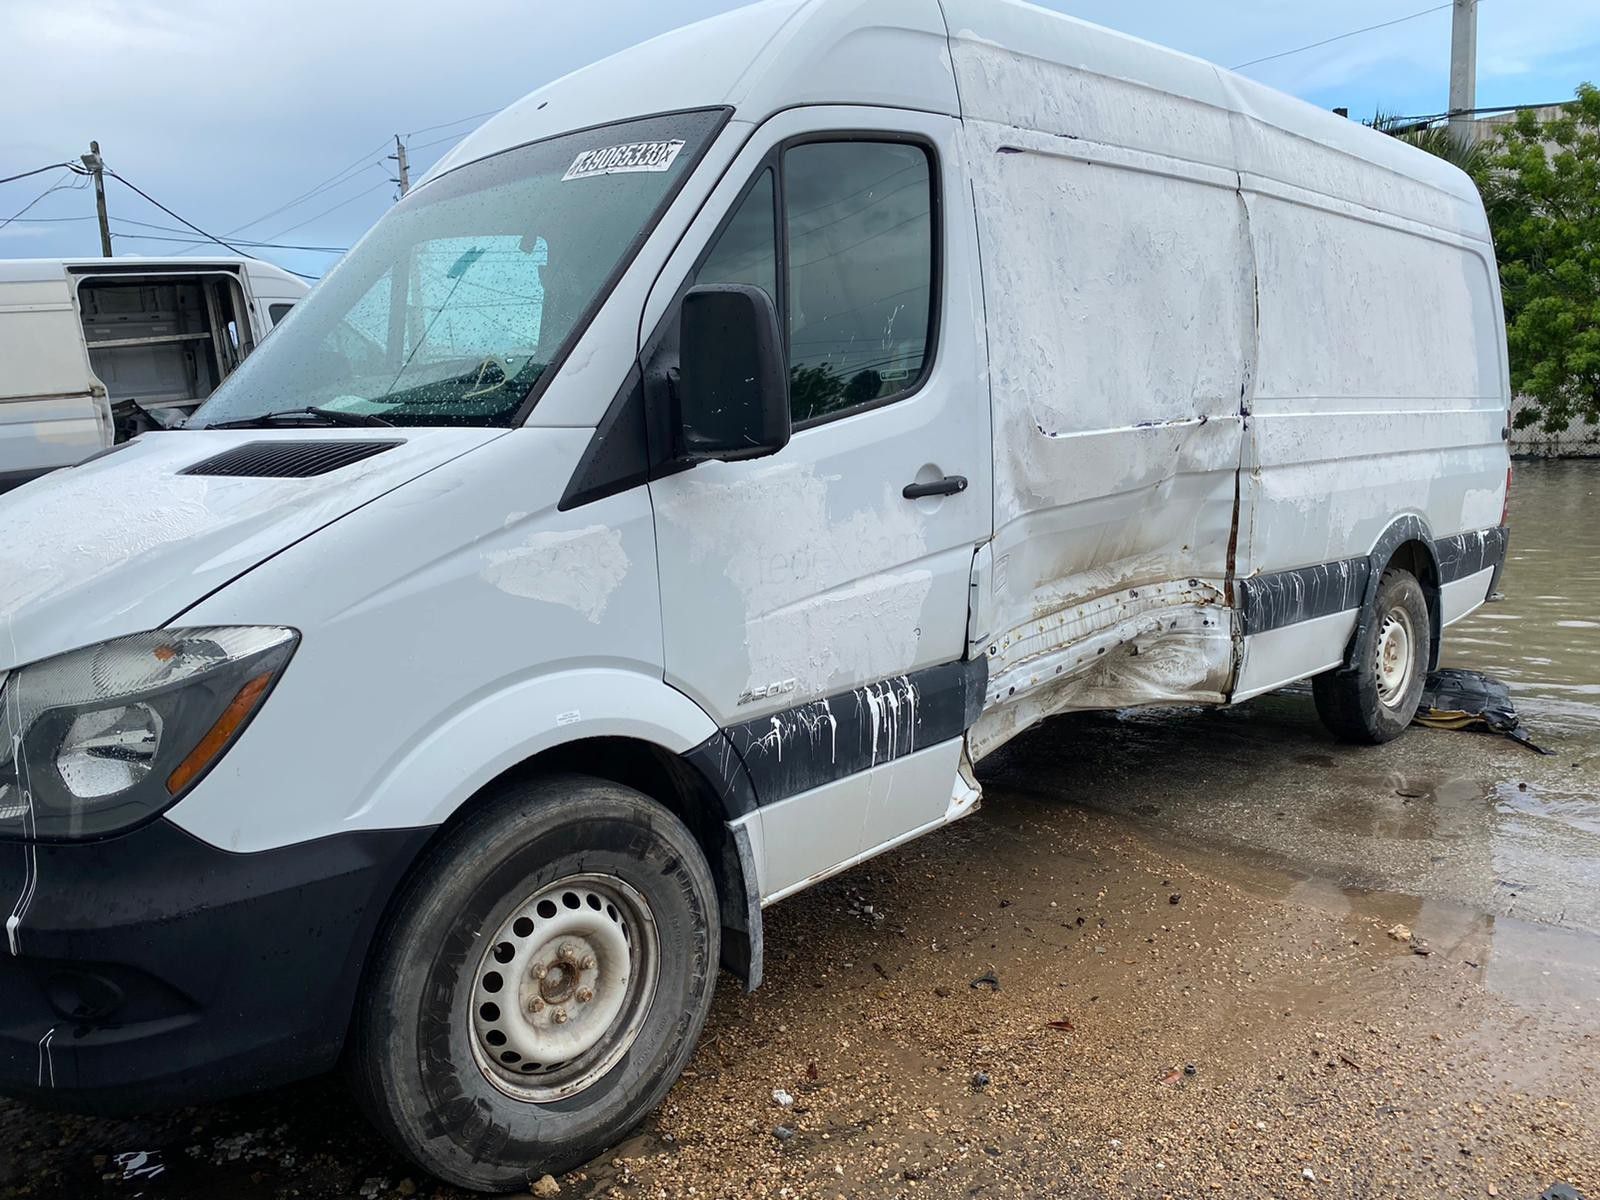 Mercedes sprinter 2500 engine 3.0l and 2.1l for 2008-2015 and 2016-2018 transmission parts parting out